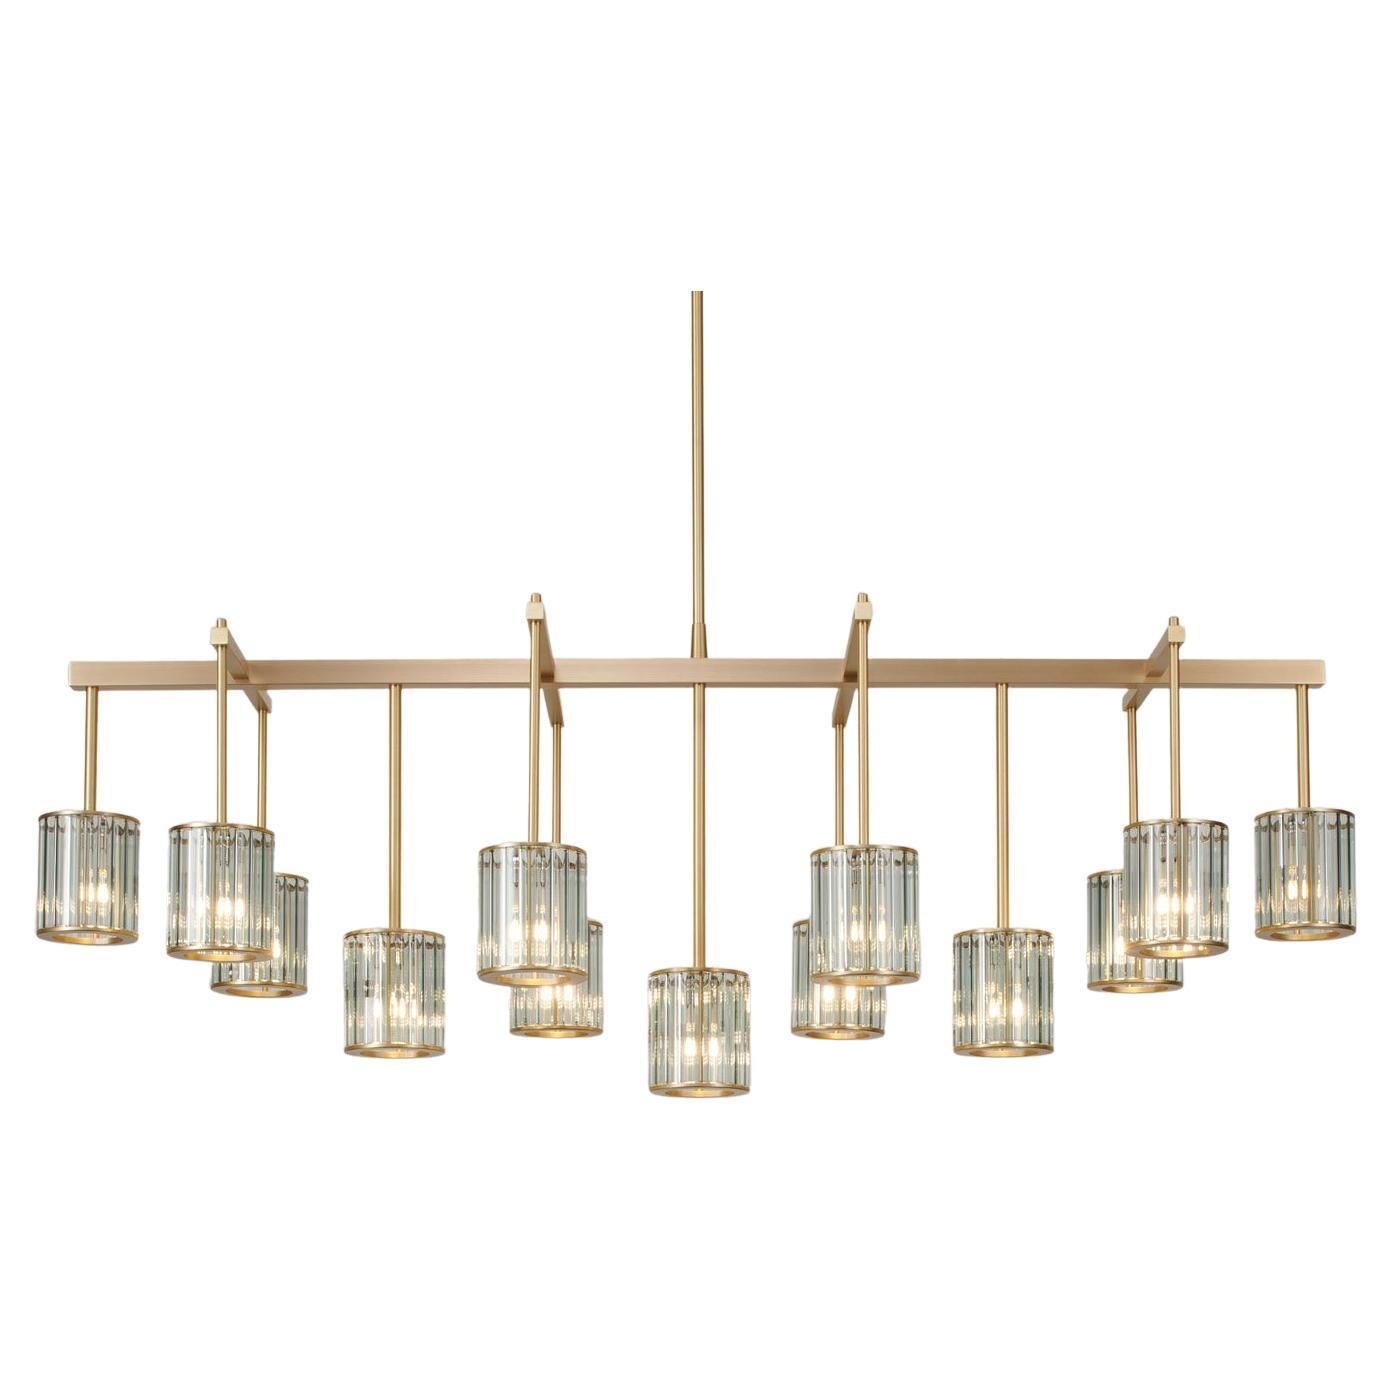 Flute Beam Chandelier with 13 Arms in Brushed Brass and Smoke Glass Diffusers For Sale